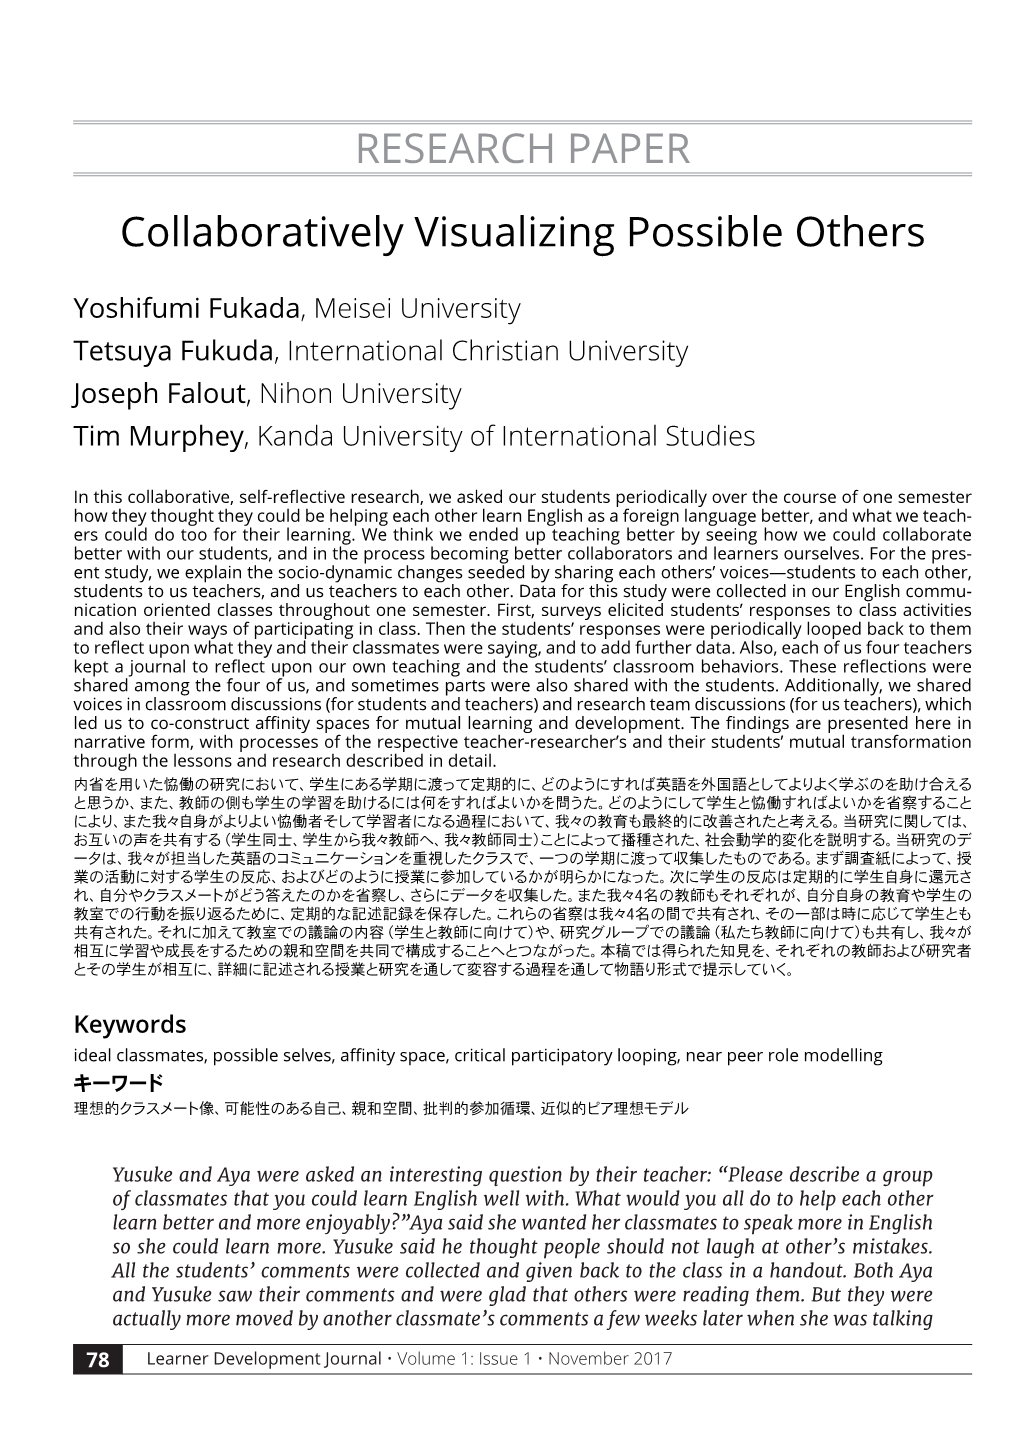 Collaboratively Visualizing Possible Others